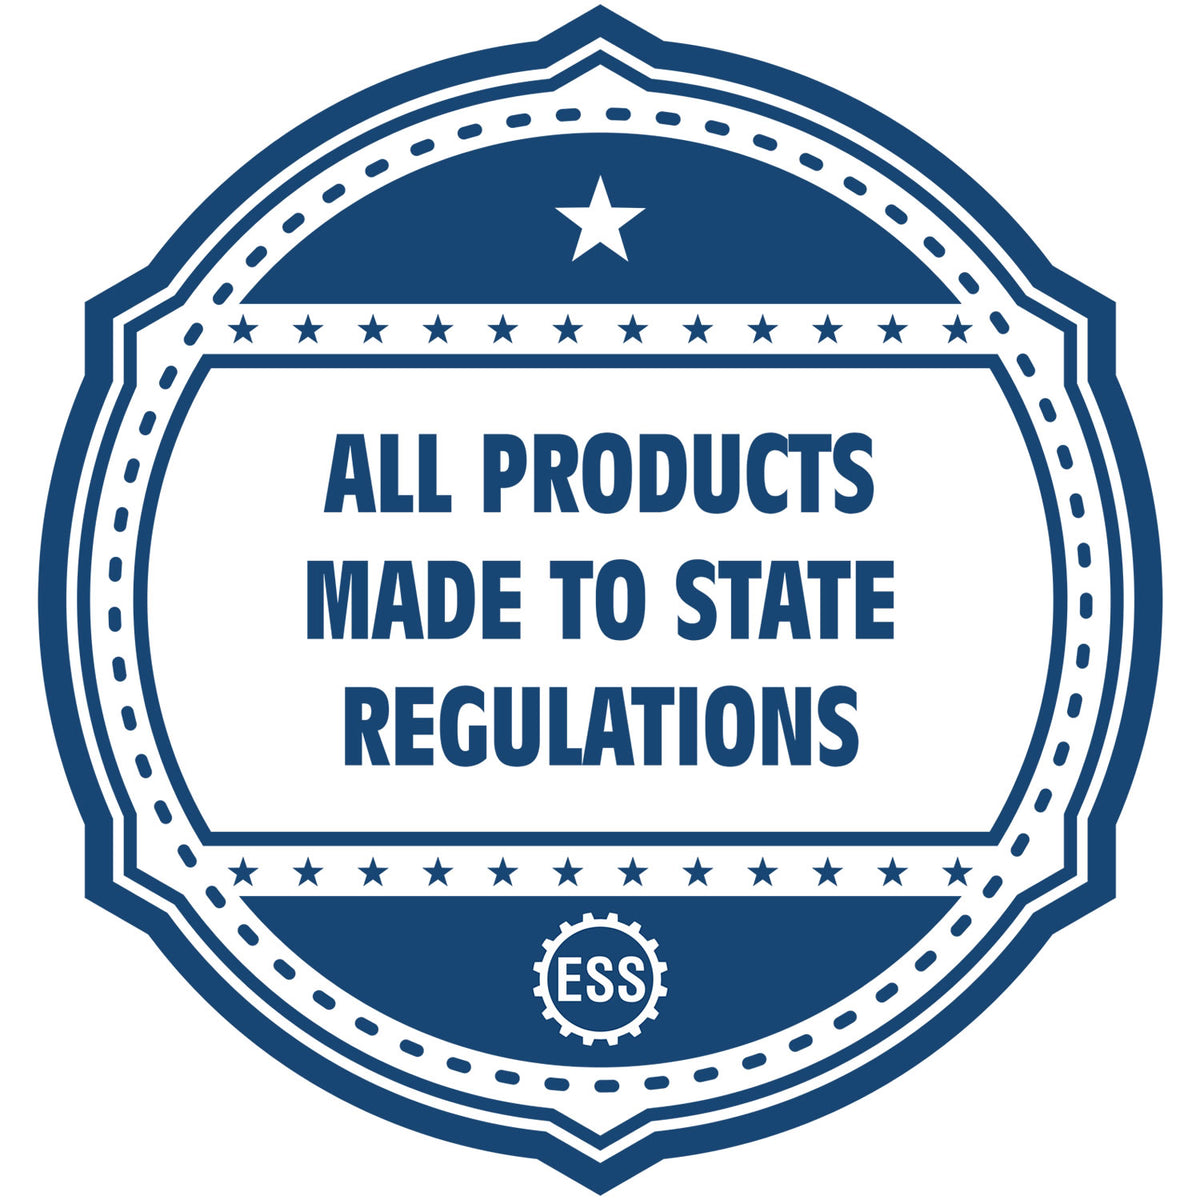 An icon or badge element for the Slim Pre-Inked Ohio Professional Engineer Seal Stamp showing that this product is made in compliance with state regulations.